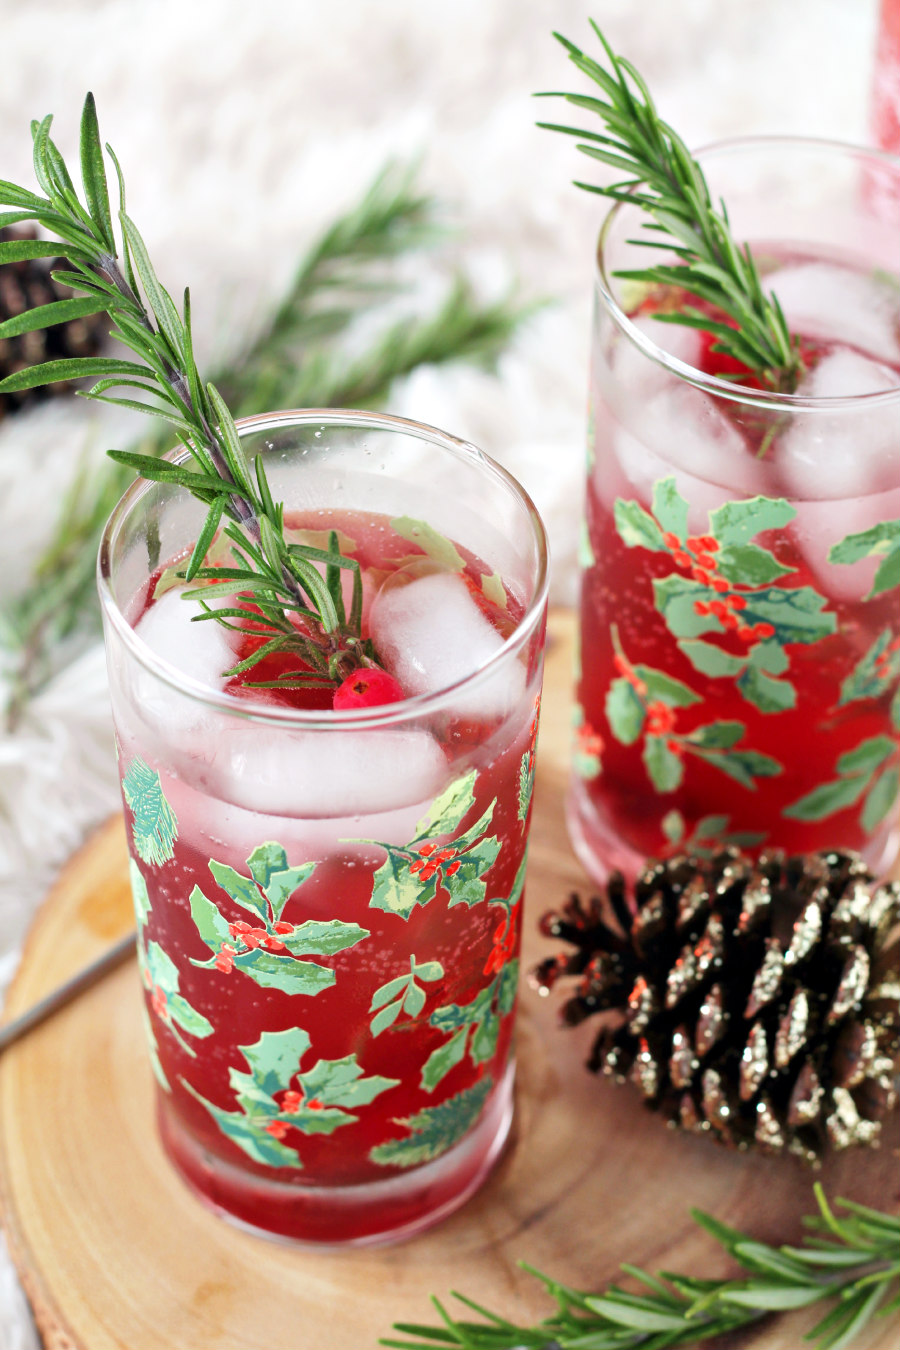 Rhubarb and Cranberry Gin and Tonic in holly berry glasses garnished with fresh rosemary sprigs. Glasses sit on wood slice with fresh rosemary and sparkly pine cones.